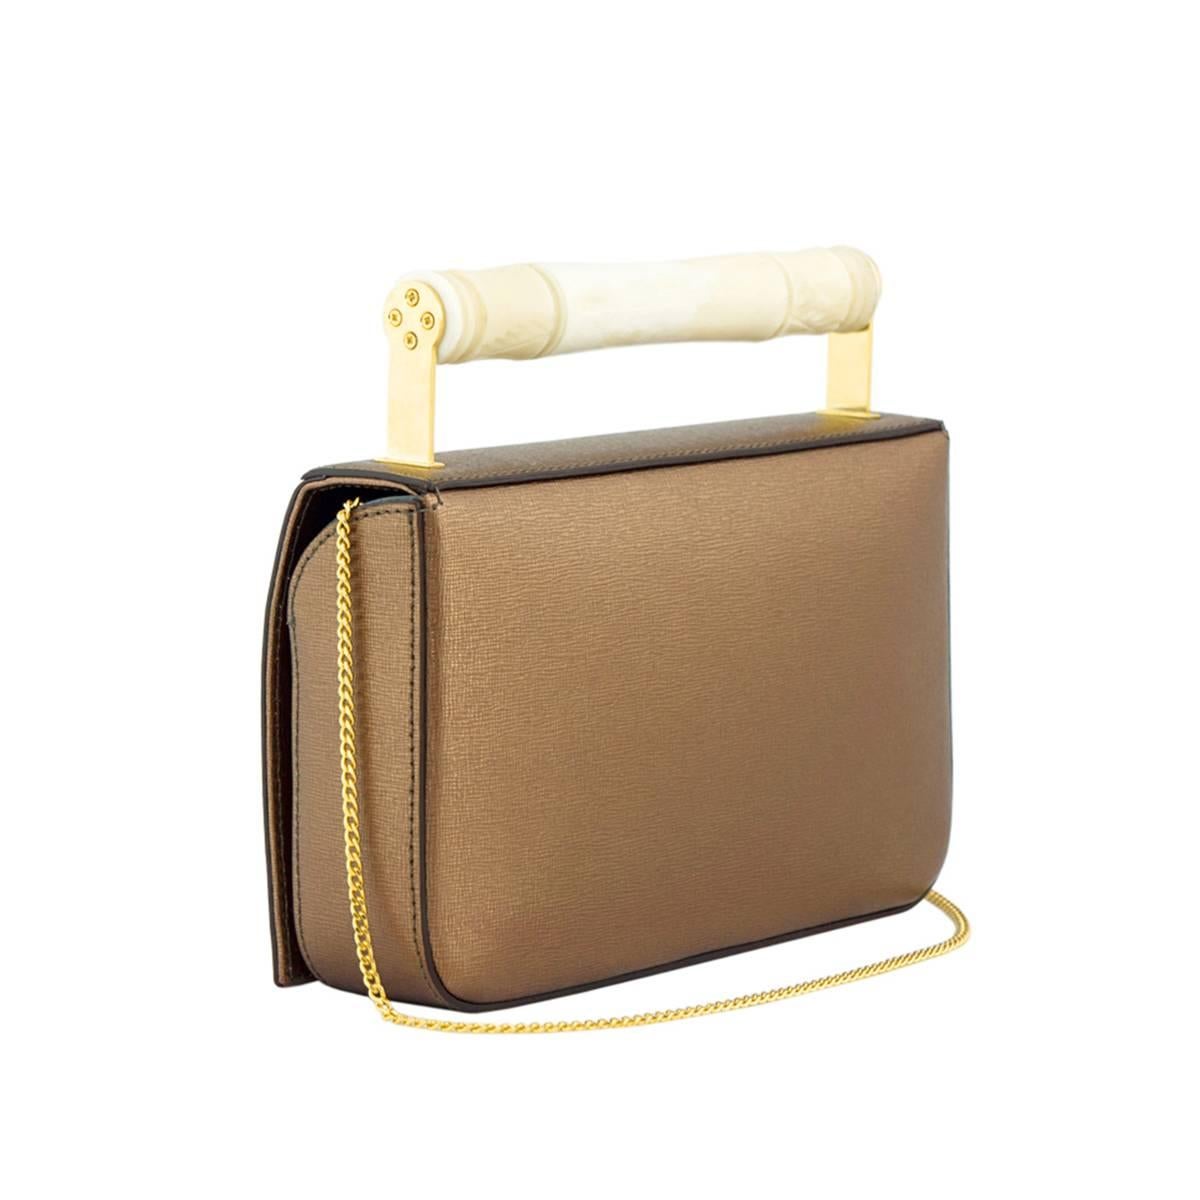 Hand carved camel bone handle

Bronze saffiano finish leather with grey pigskin lining

Brass hardware

Magnetic flap closures

Long chain shoulder strap

Internal card holder and zip pocket